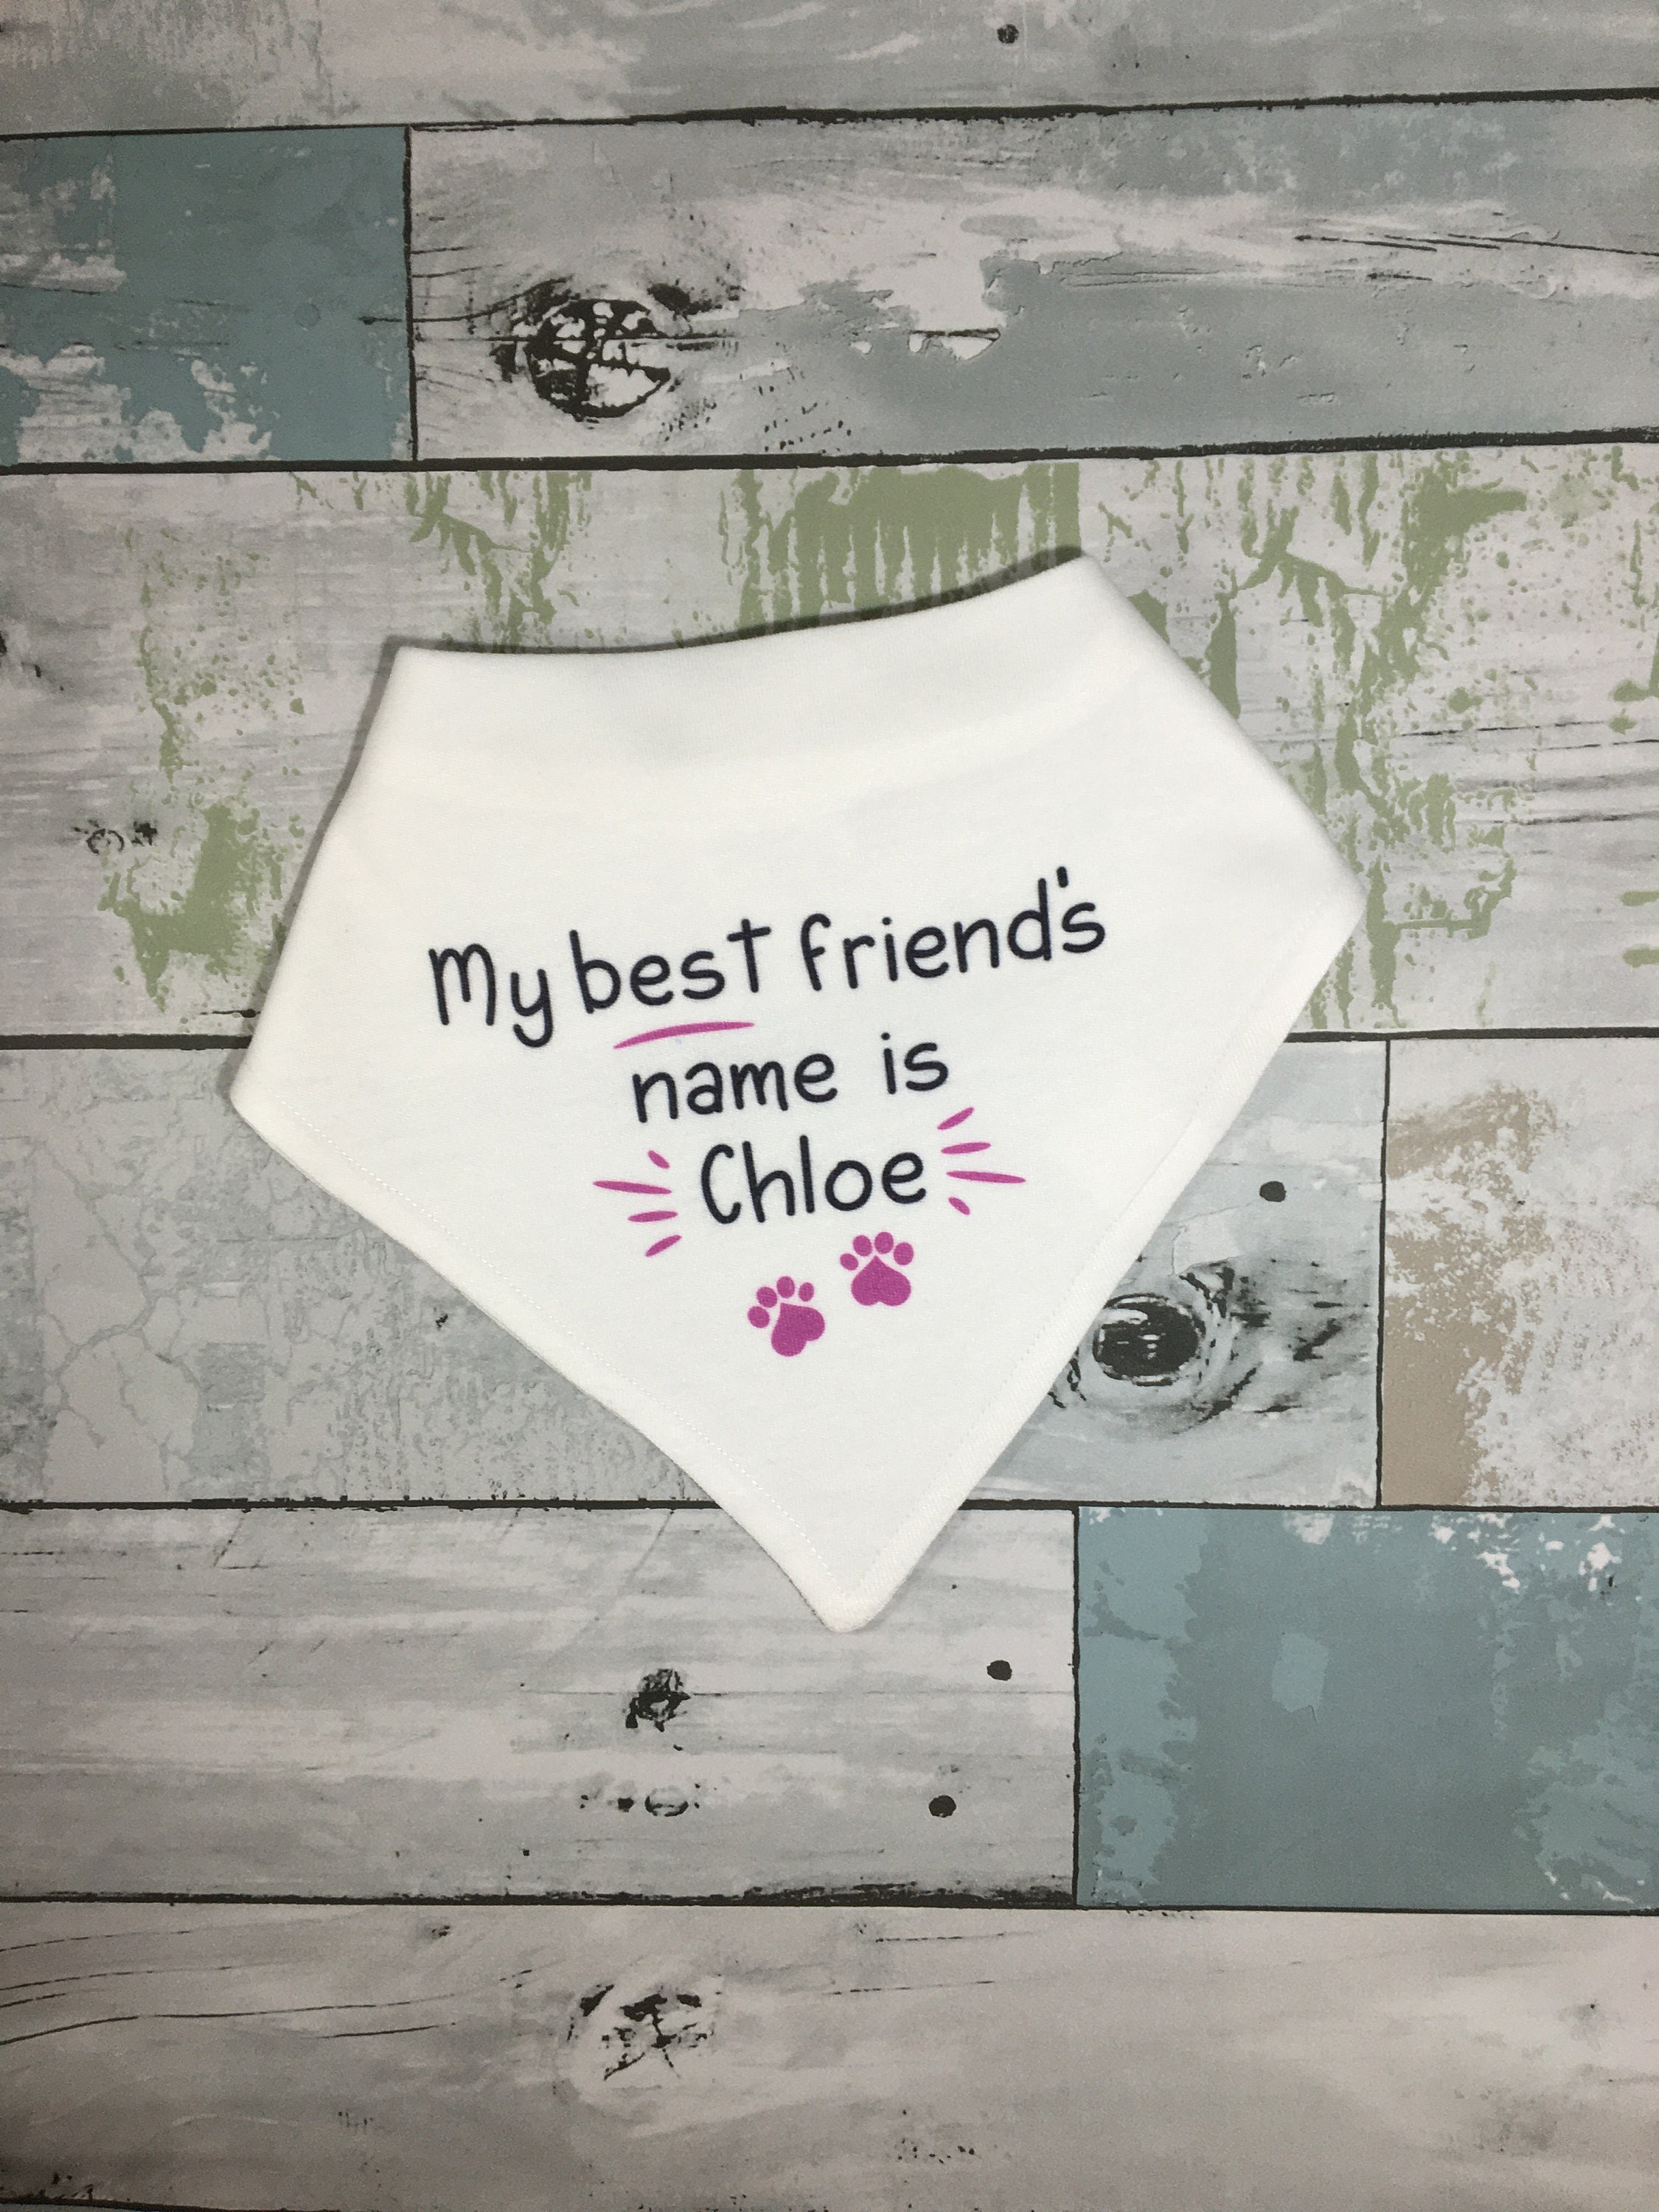 My best friends name is drool bib personalized baby gift | Etsy